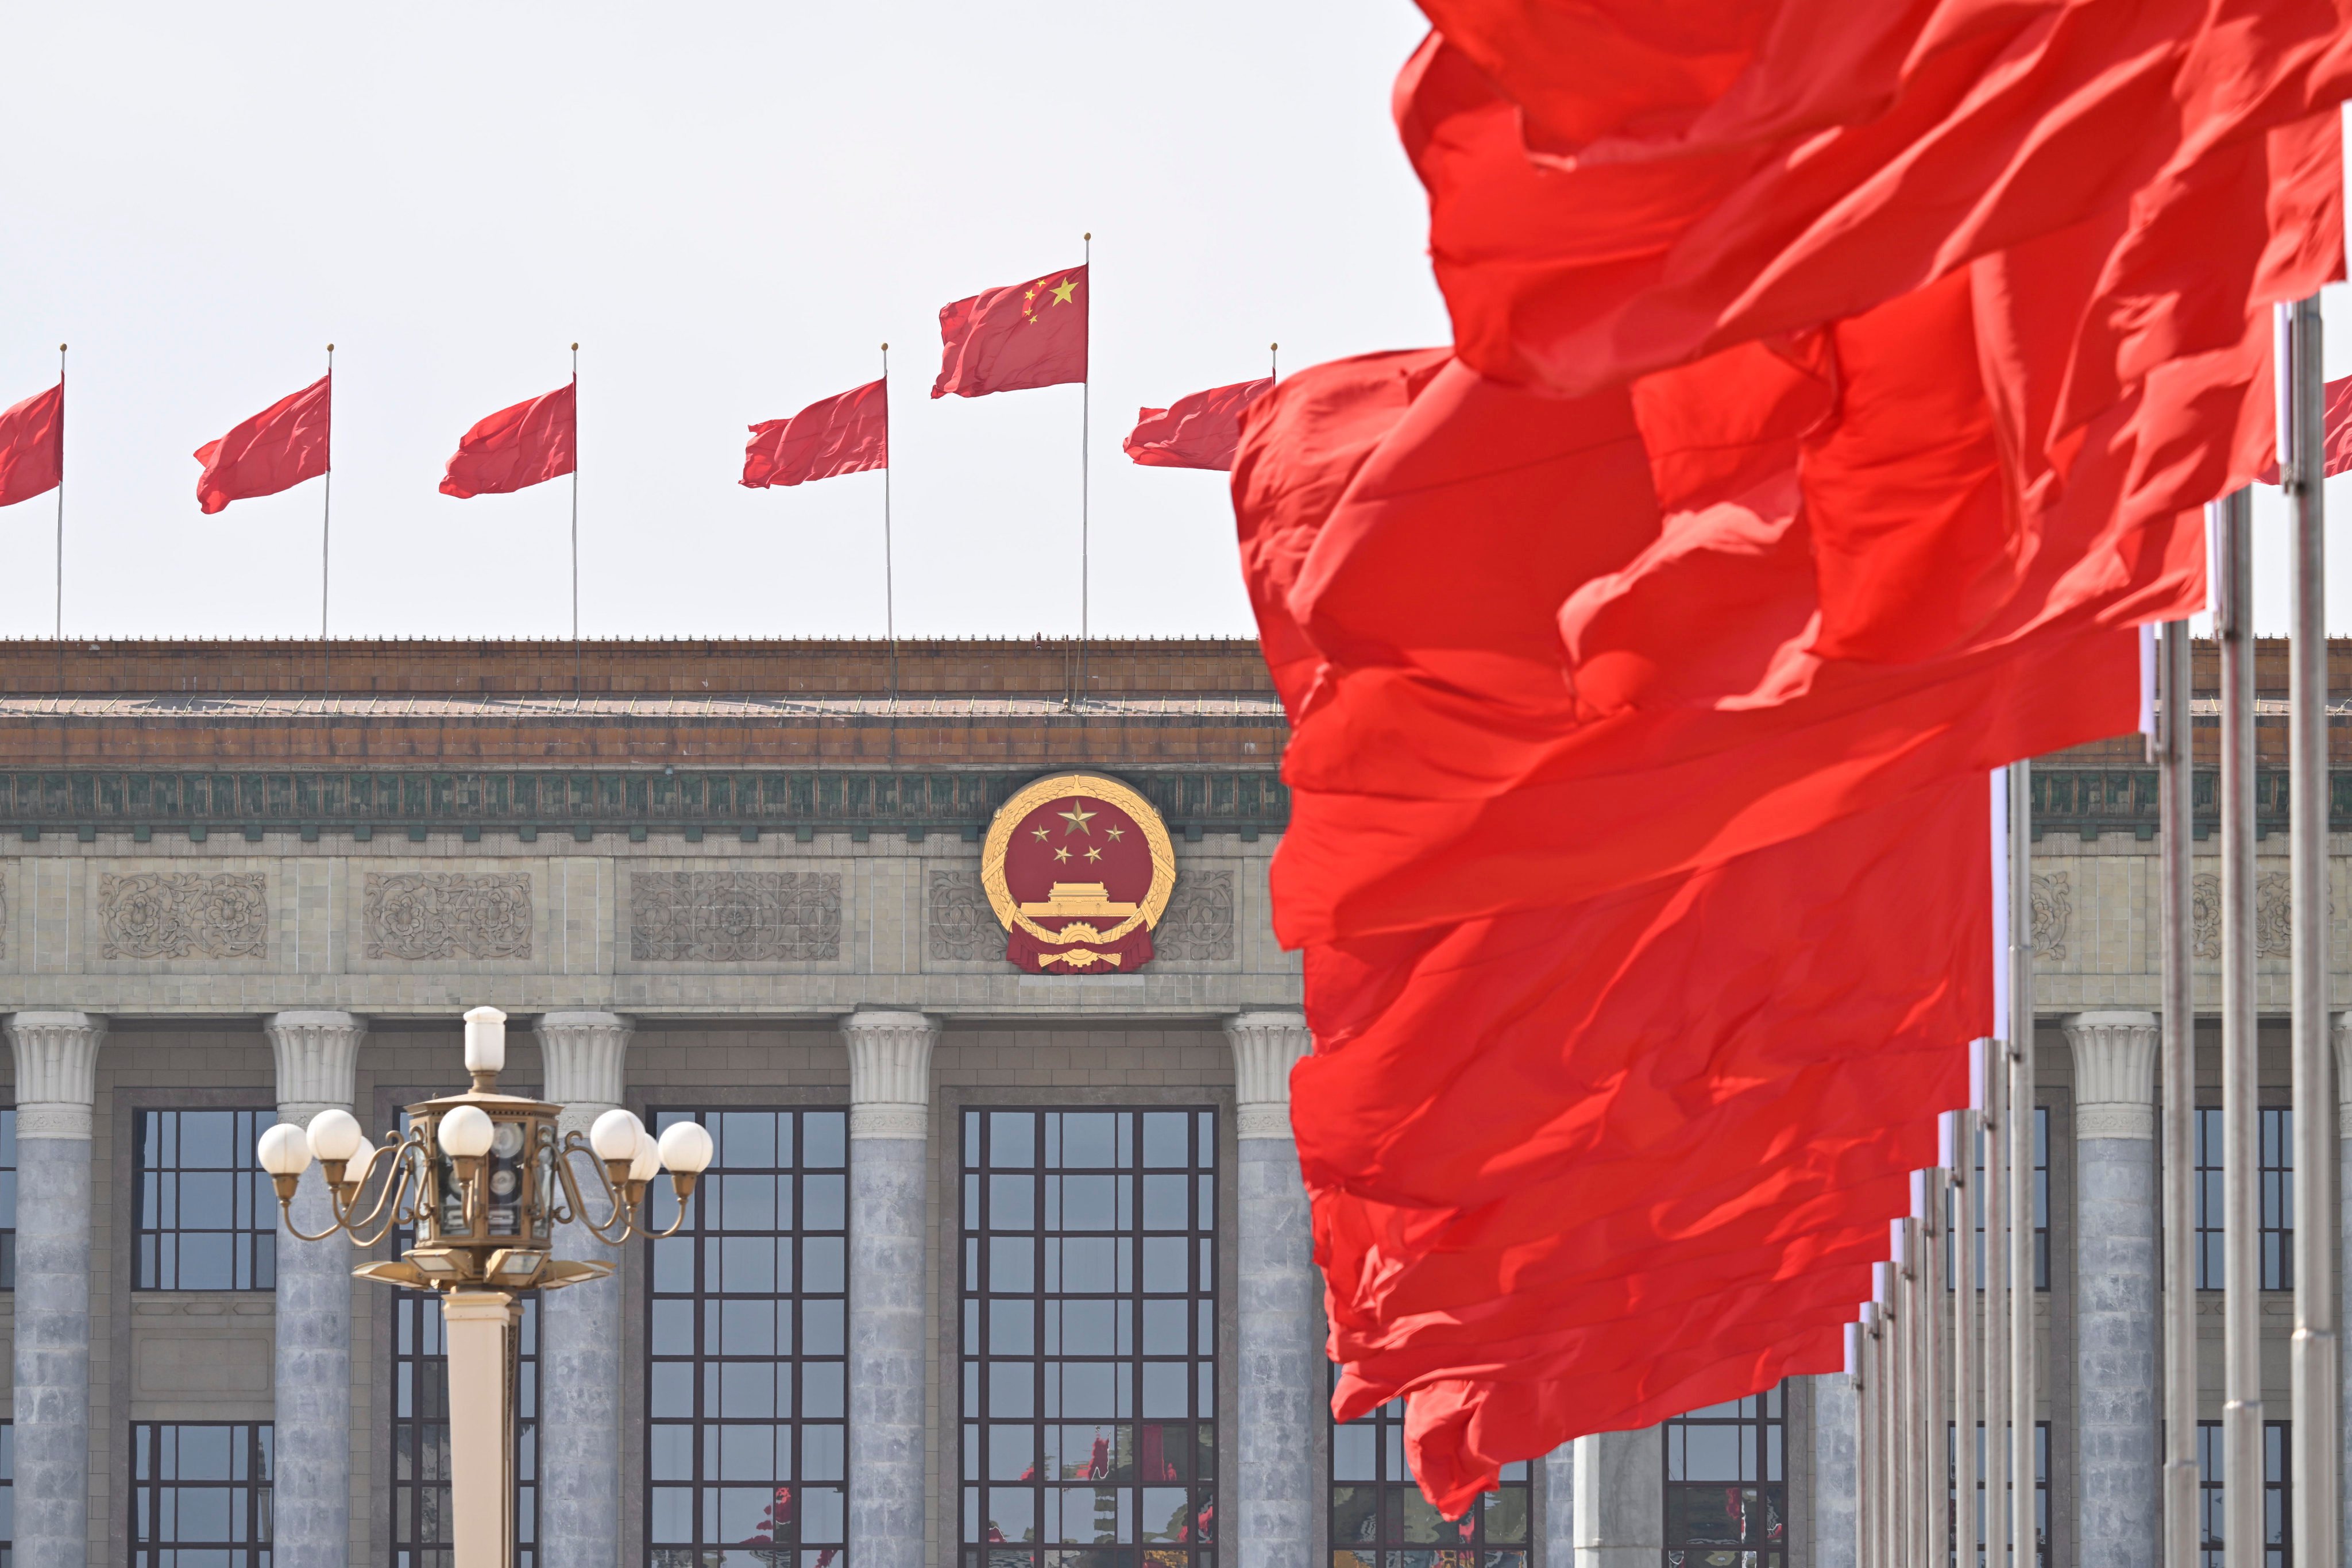 The amended law states that the cabinet must closely follow the political teachings of top leaders including President Xi Jinping. Photo: Xinhua